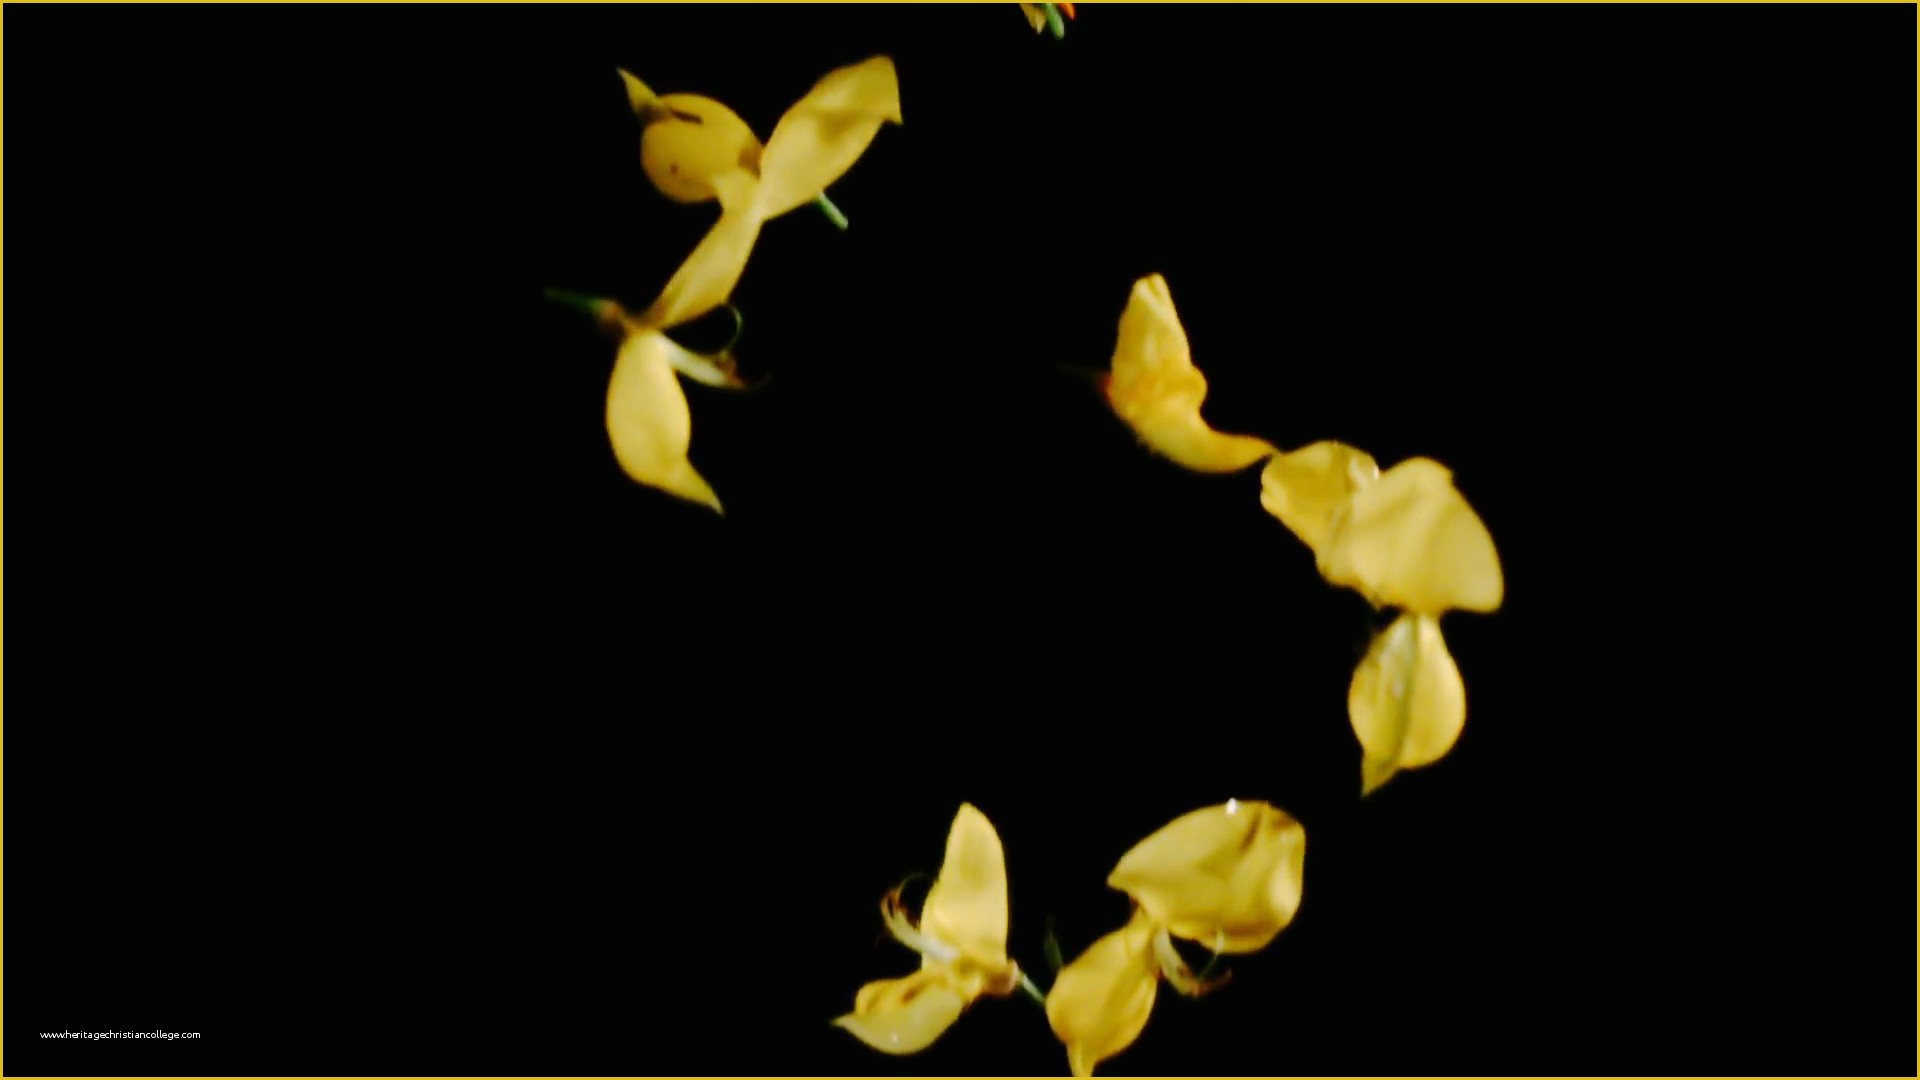 Falling Flower Petals after Effects Template Free Of Flower Petals Falling Yellow Slow Motion Stock Video